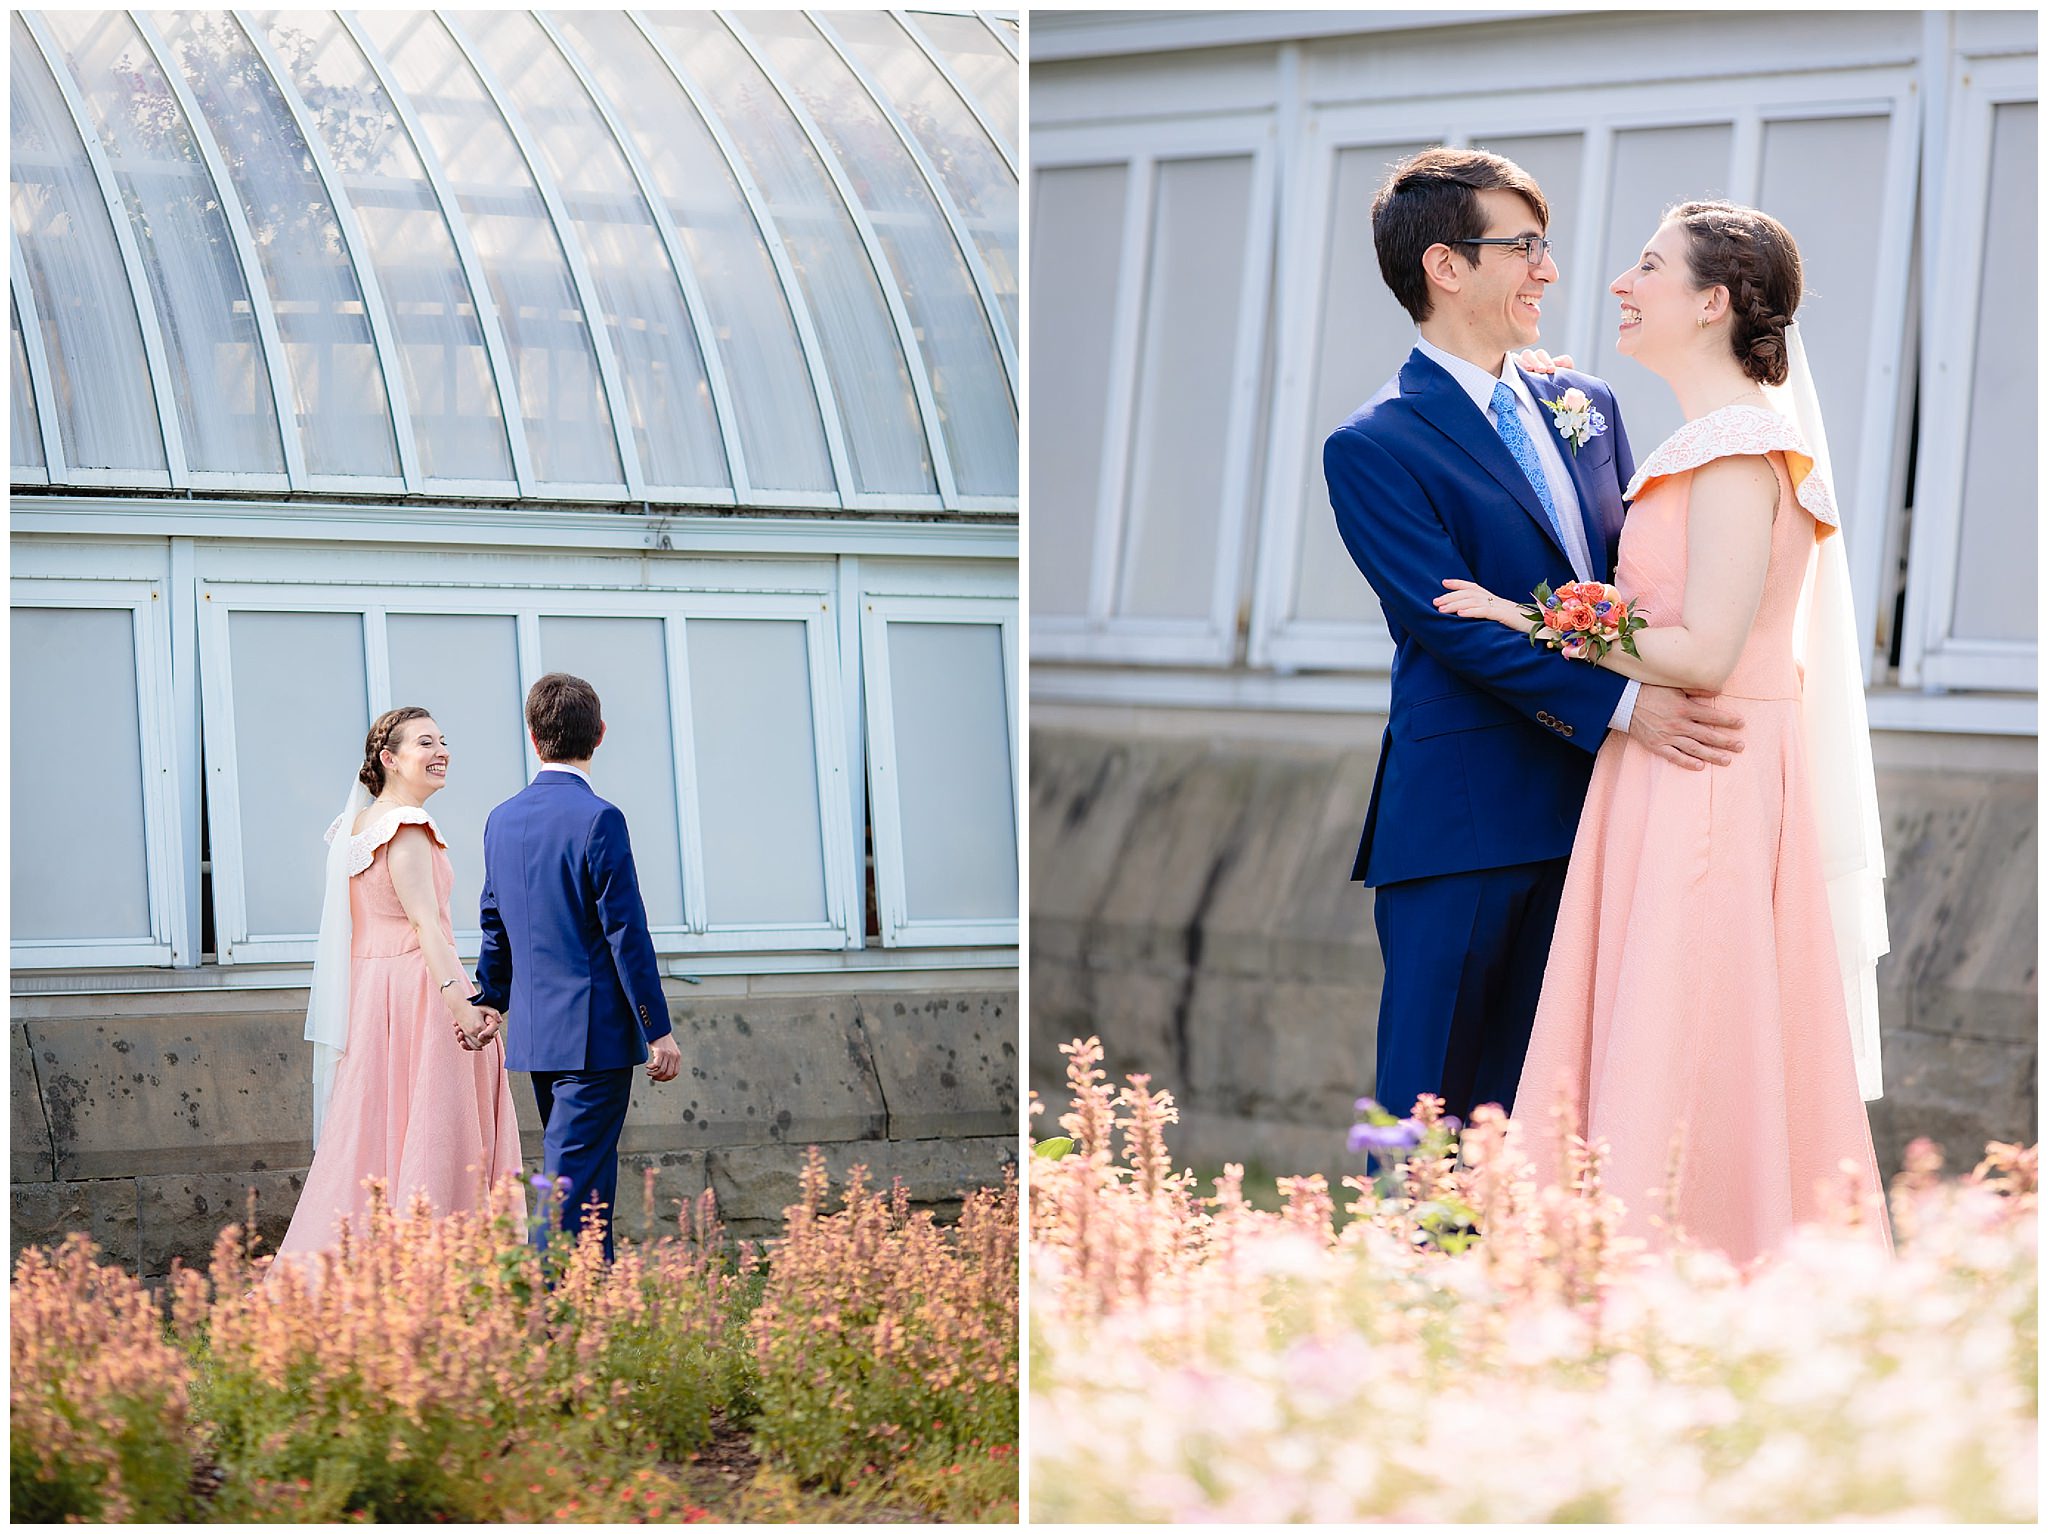 Bride & groom walk and laugh in the flower beds at Phipps Conservatory